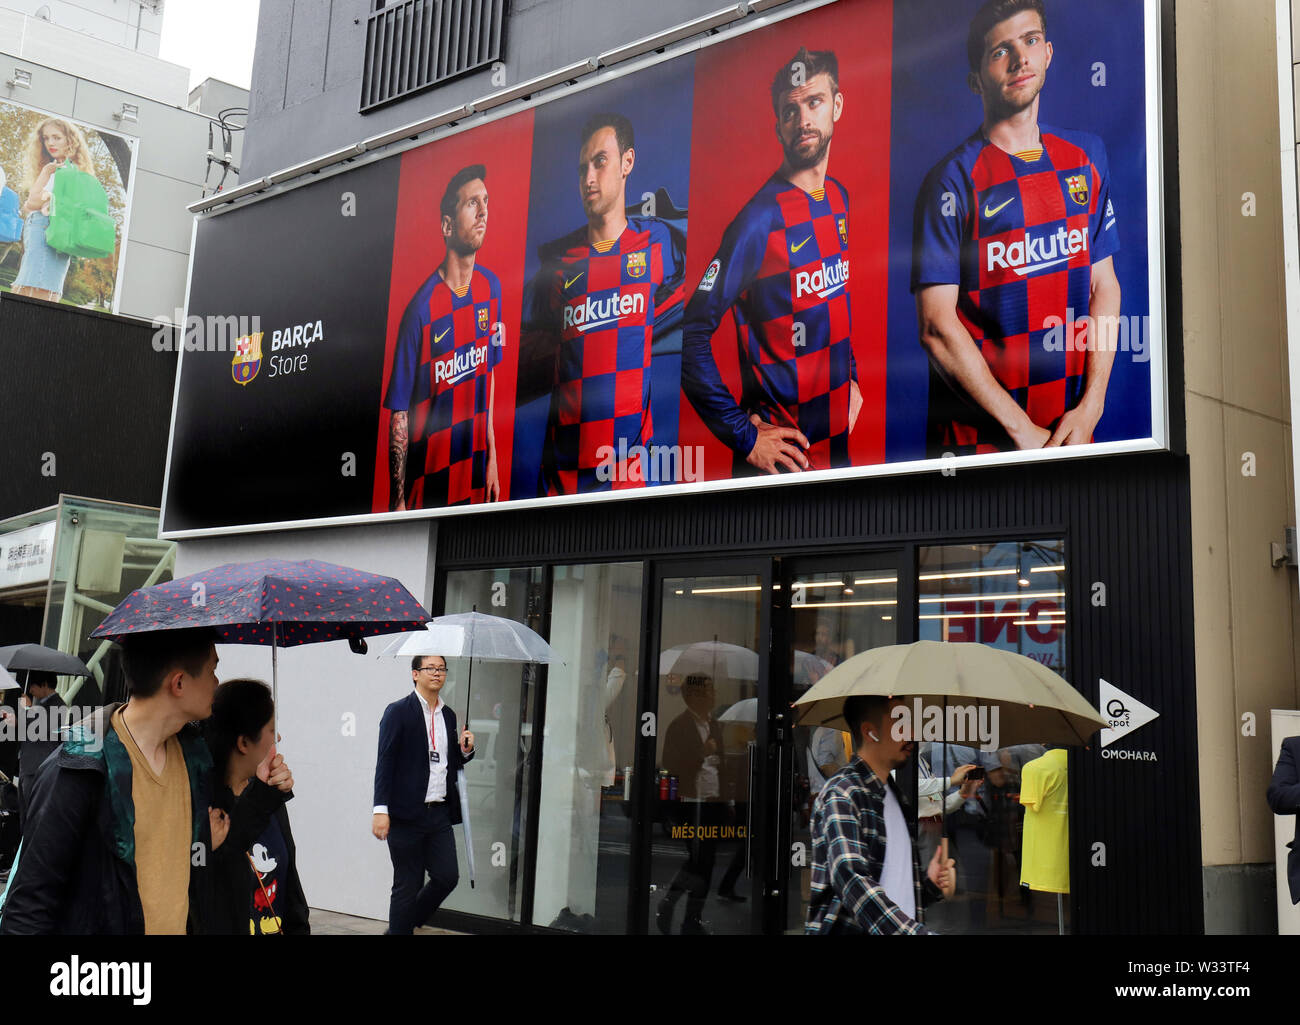 tokyo-japan-12th-july-2019-a-pop-up-store-of-the-fc-barcelona-goods-barca-japan-tour-2019-official-store-stands-at-harajuku-in-tokyo-on-friday-july-12-2019-spains-fc-barcelona-will-have-games-against-englands-chelsea-and-japans-vissel-kobe-in-japan-this-month-credit-yoshio-tsunodaafloalamy-live-news-W33TF4.jpg